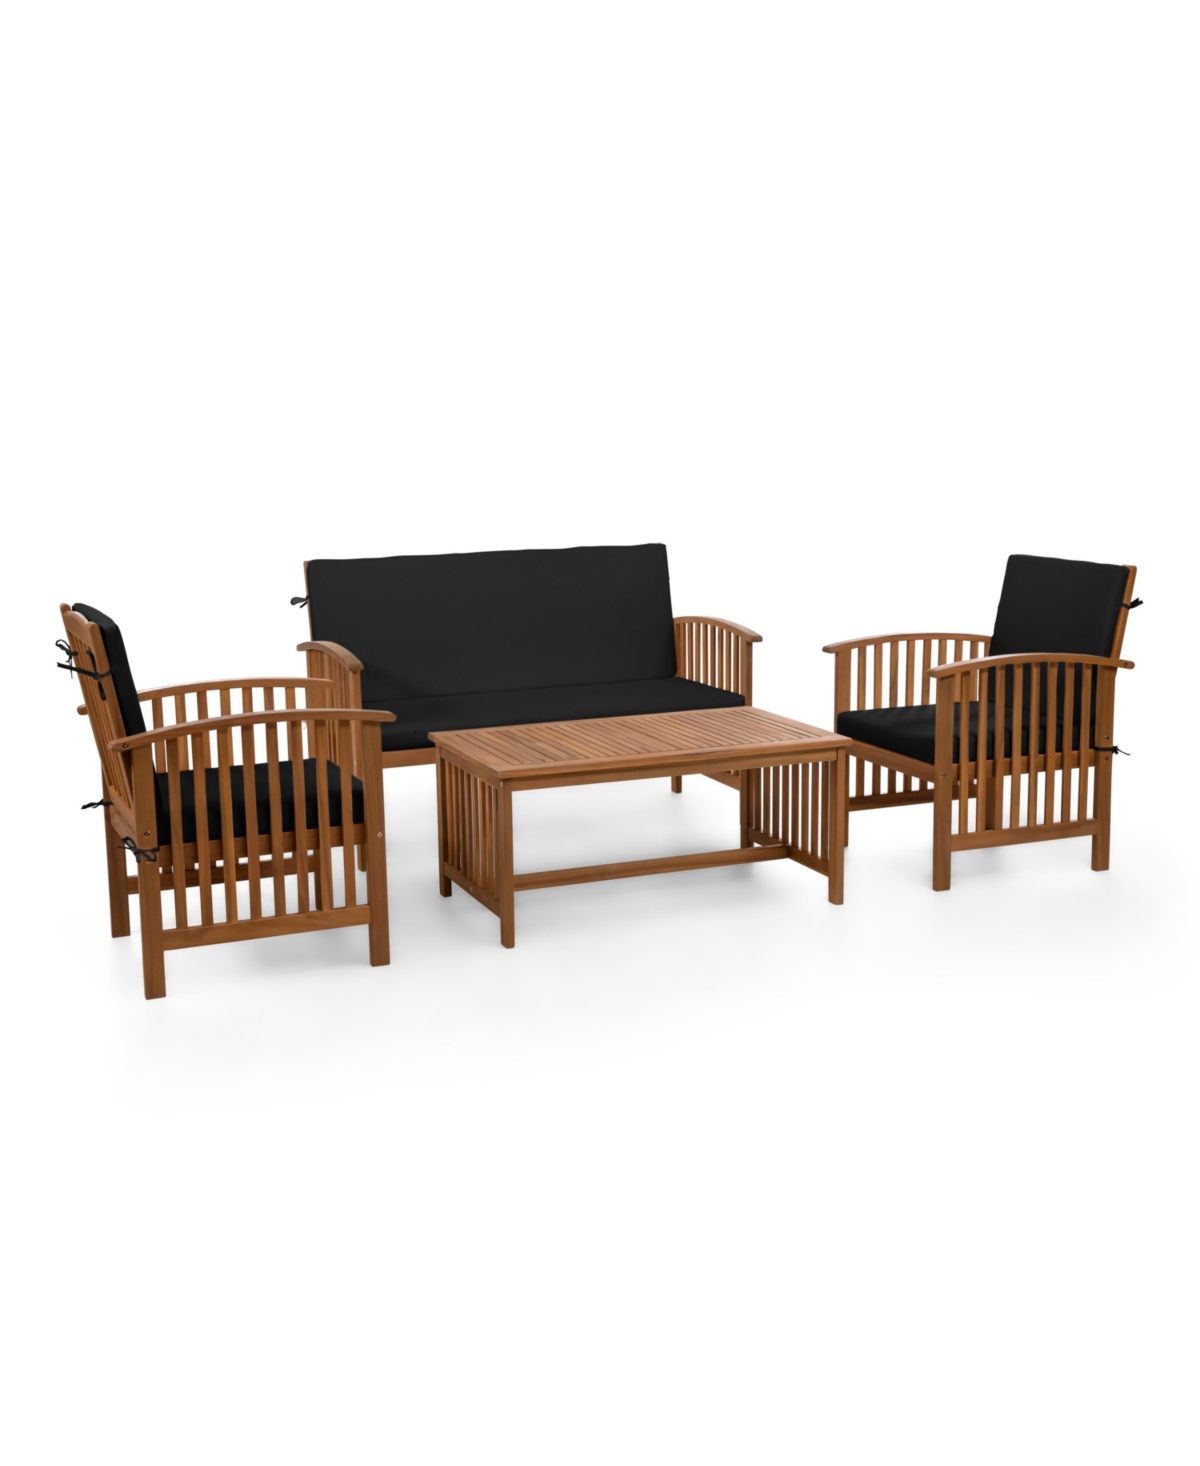 Furniture Of America 4 Piece Acacia Patio Conversation Set With Removable Cushions In Black